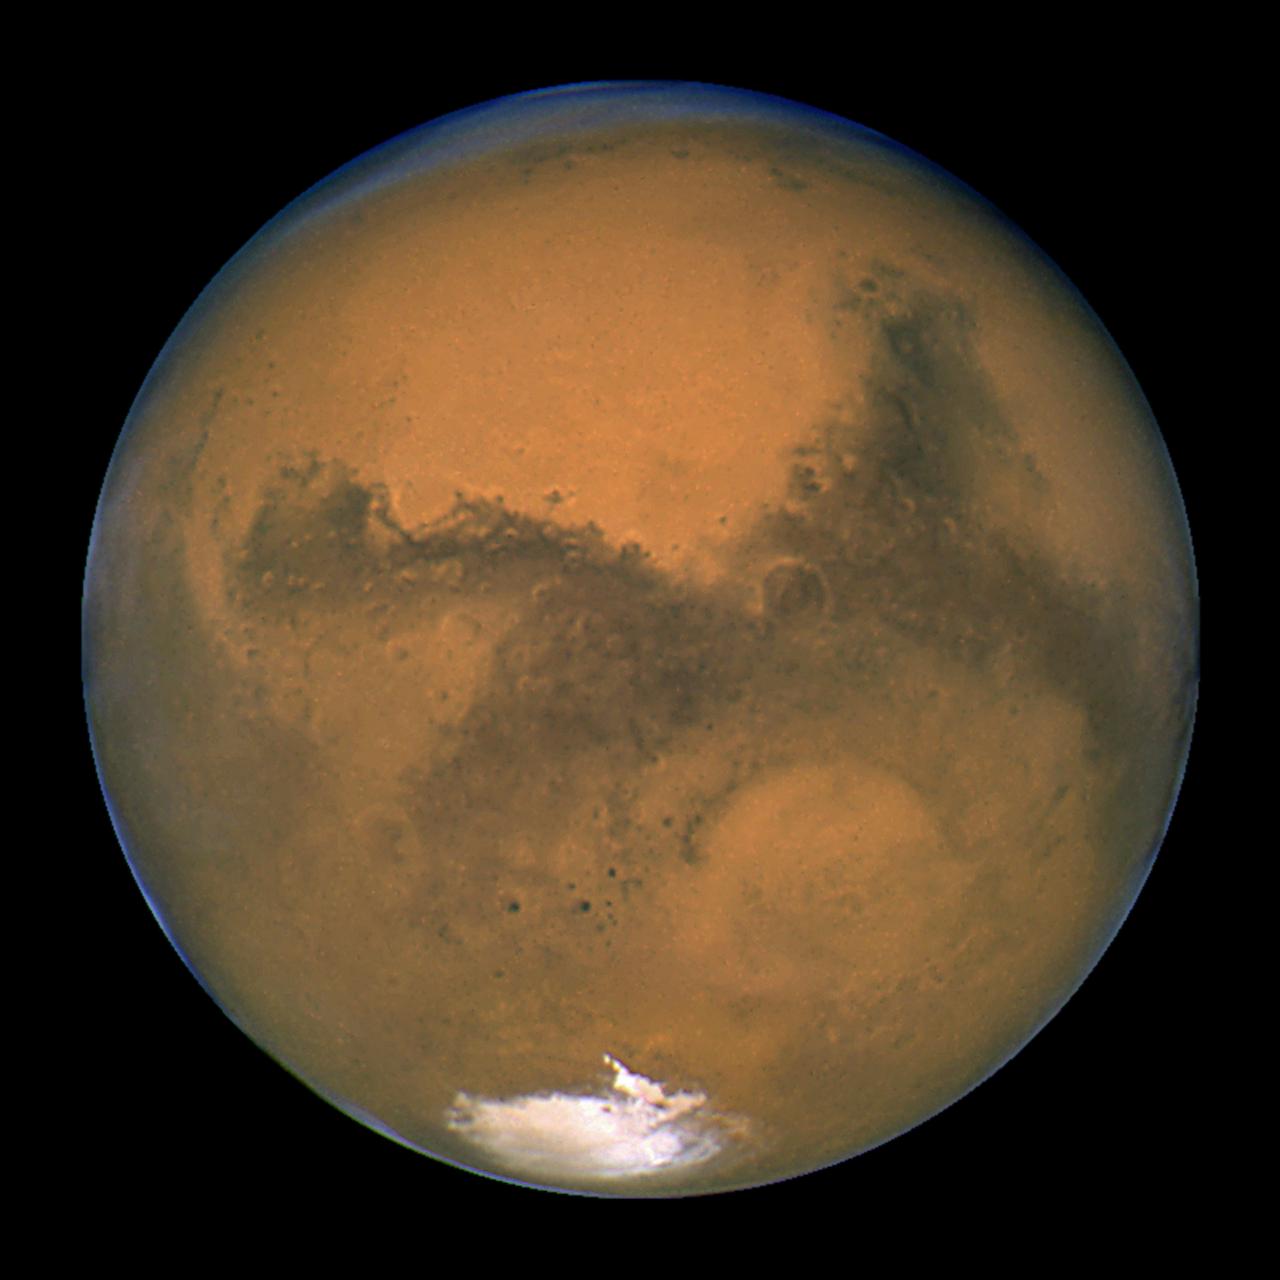 Mars is seen lined up with the sun and the Earth in this Aug 26, 2003 image made available by Nasa. Photo: AP